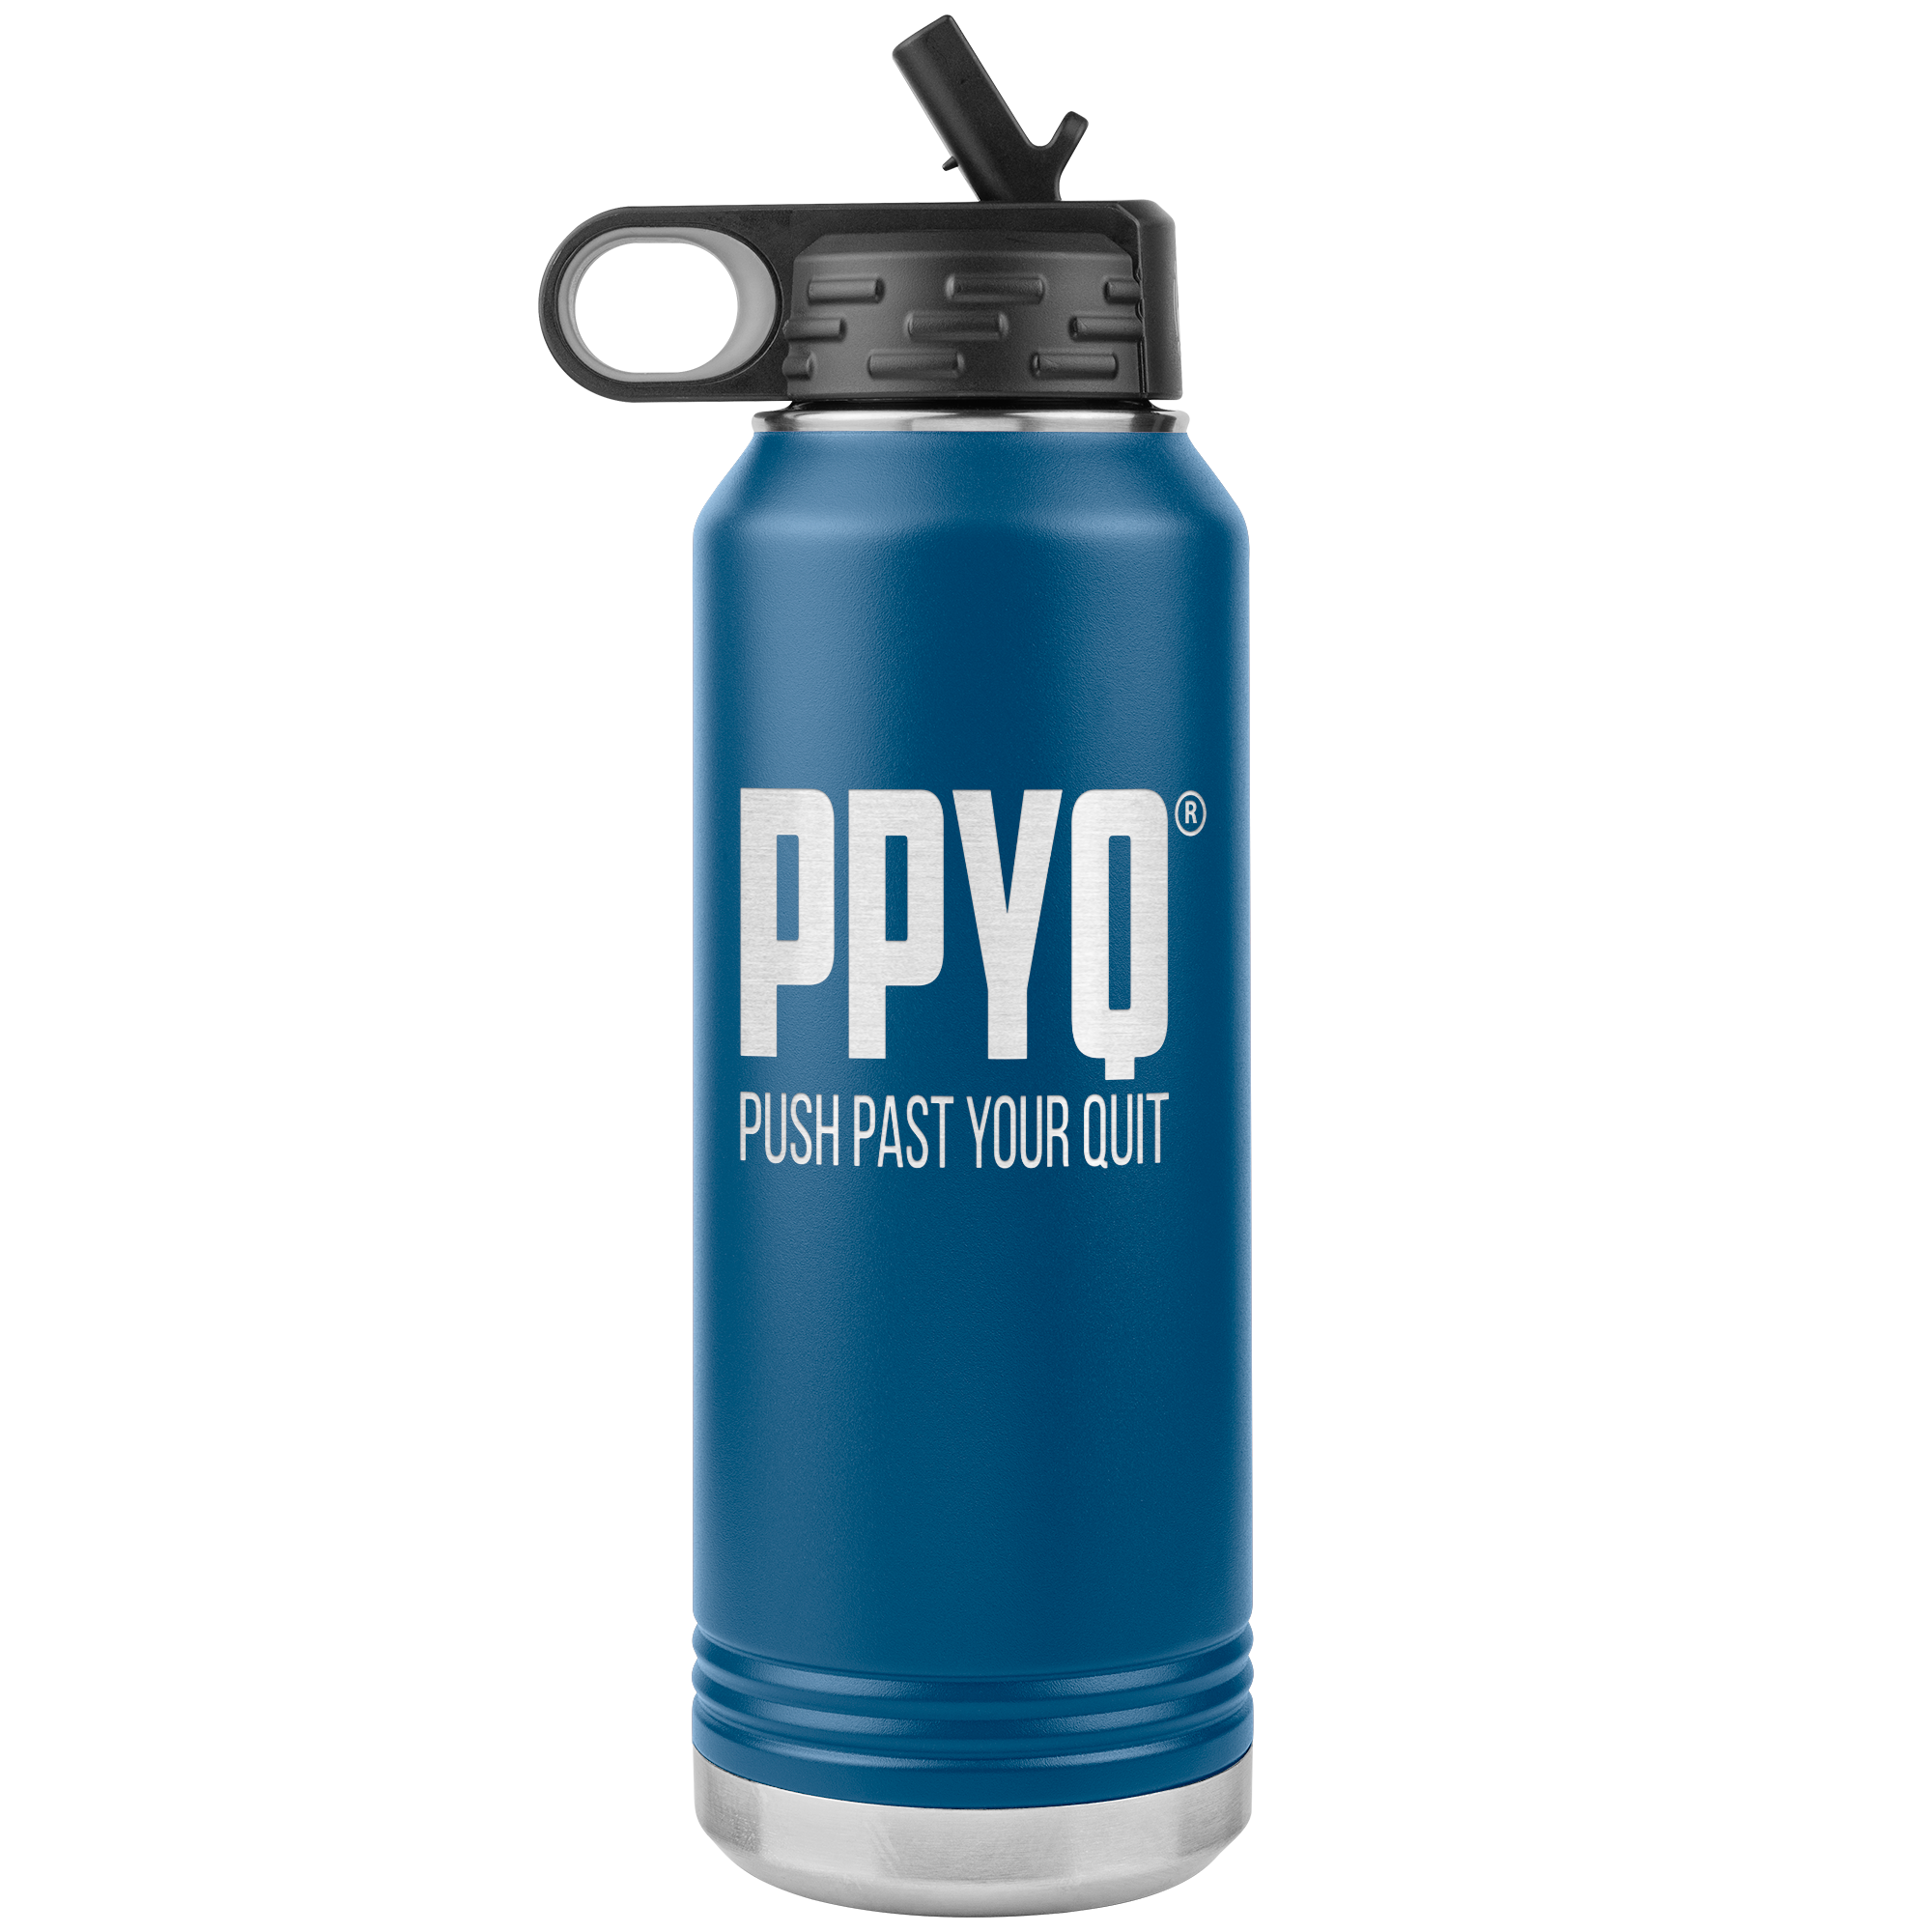 32oz. Stainless steel Water Bottle Tumblers